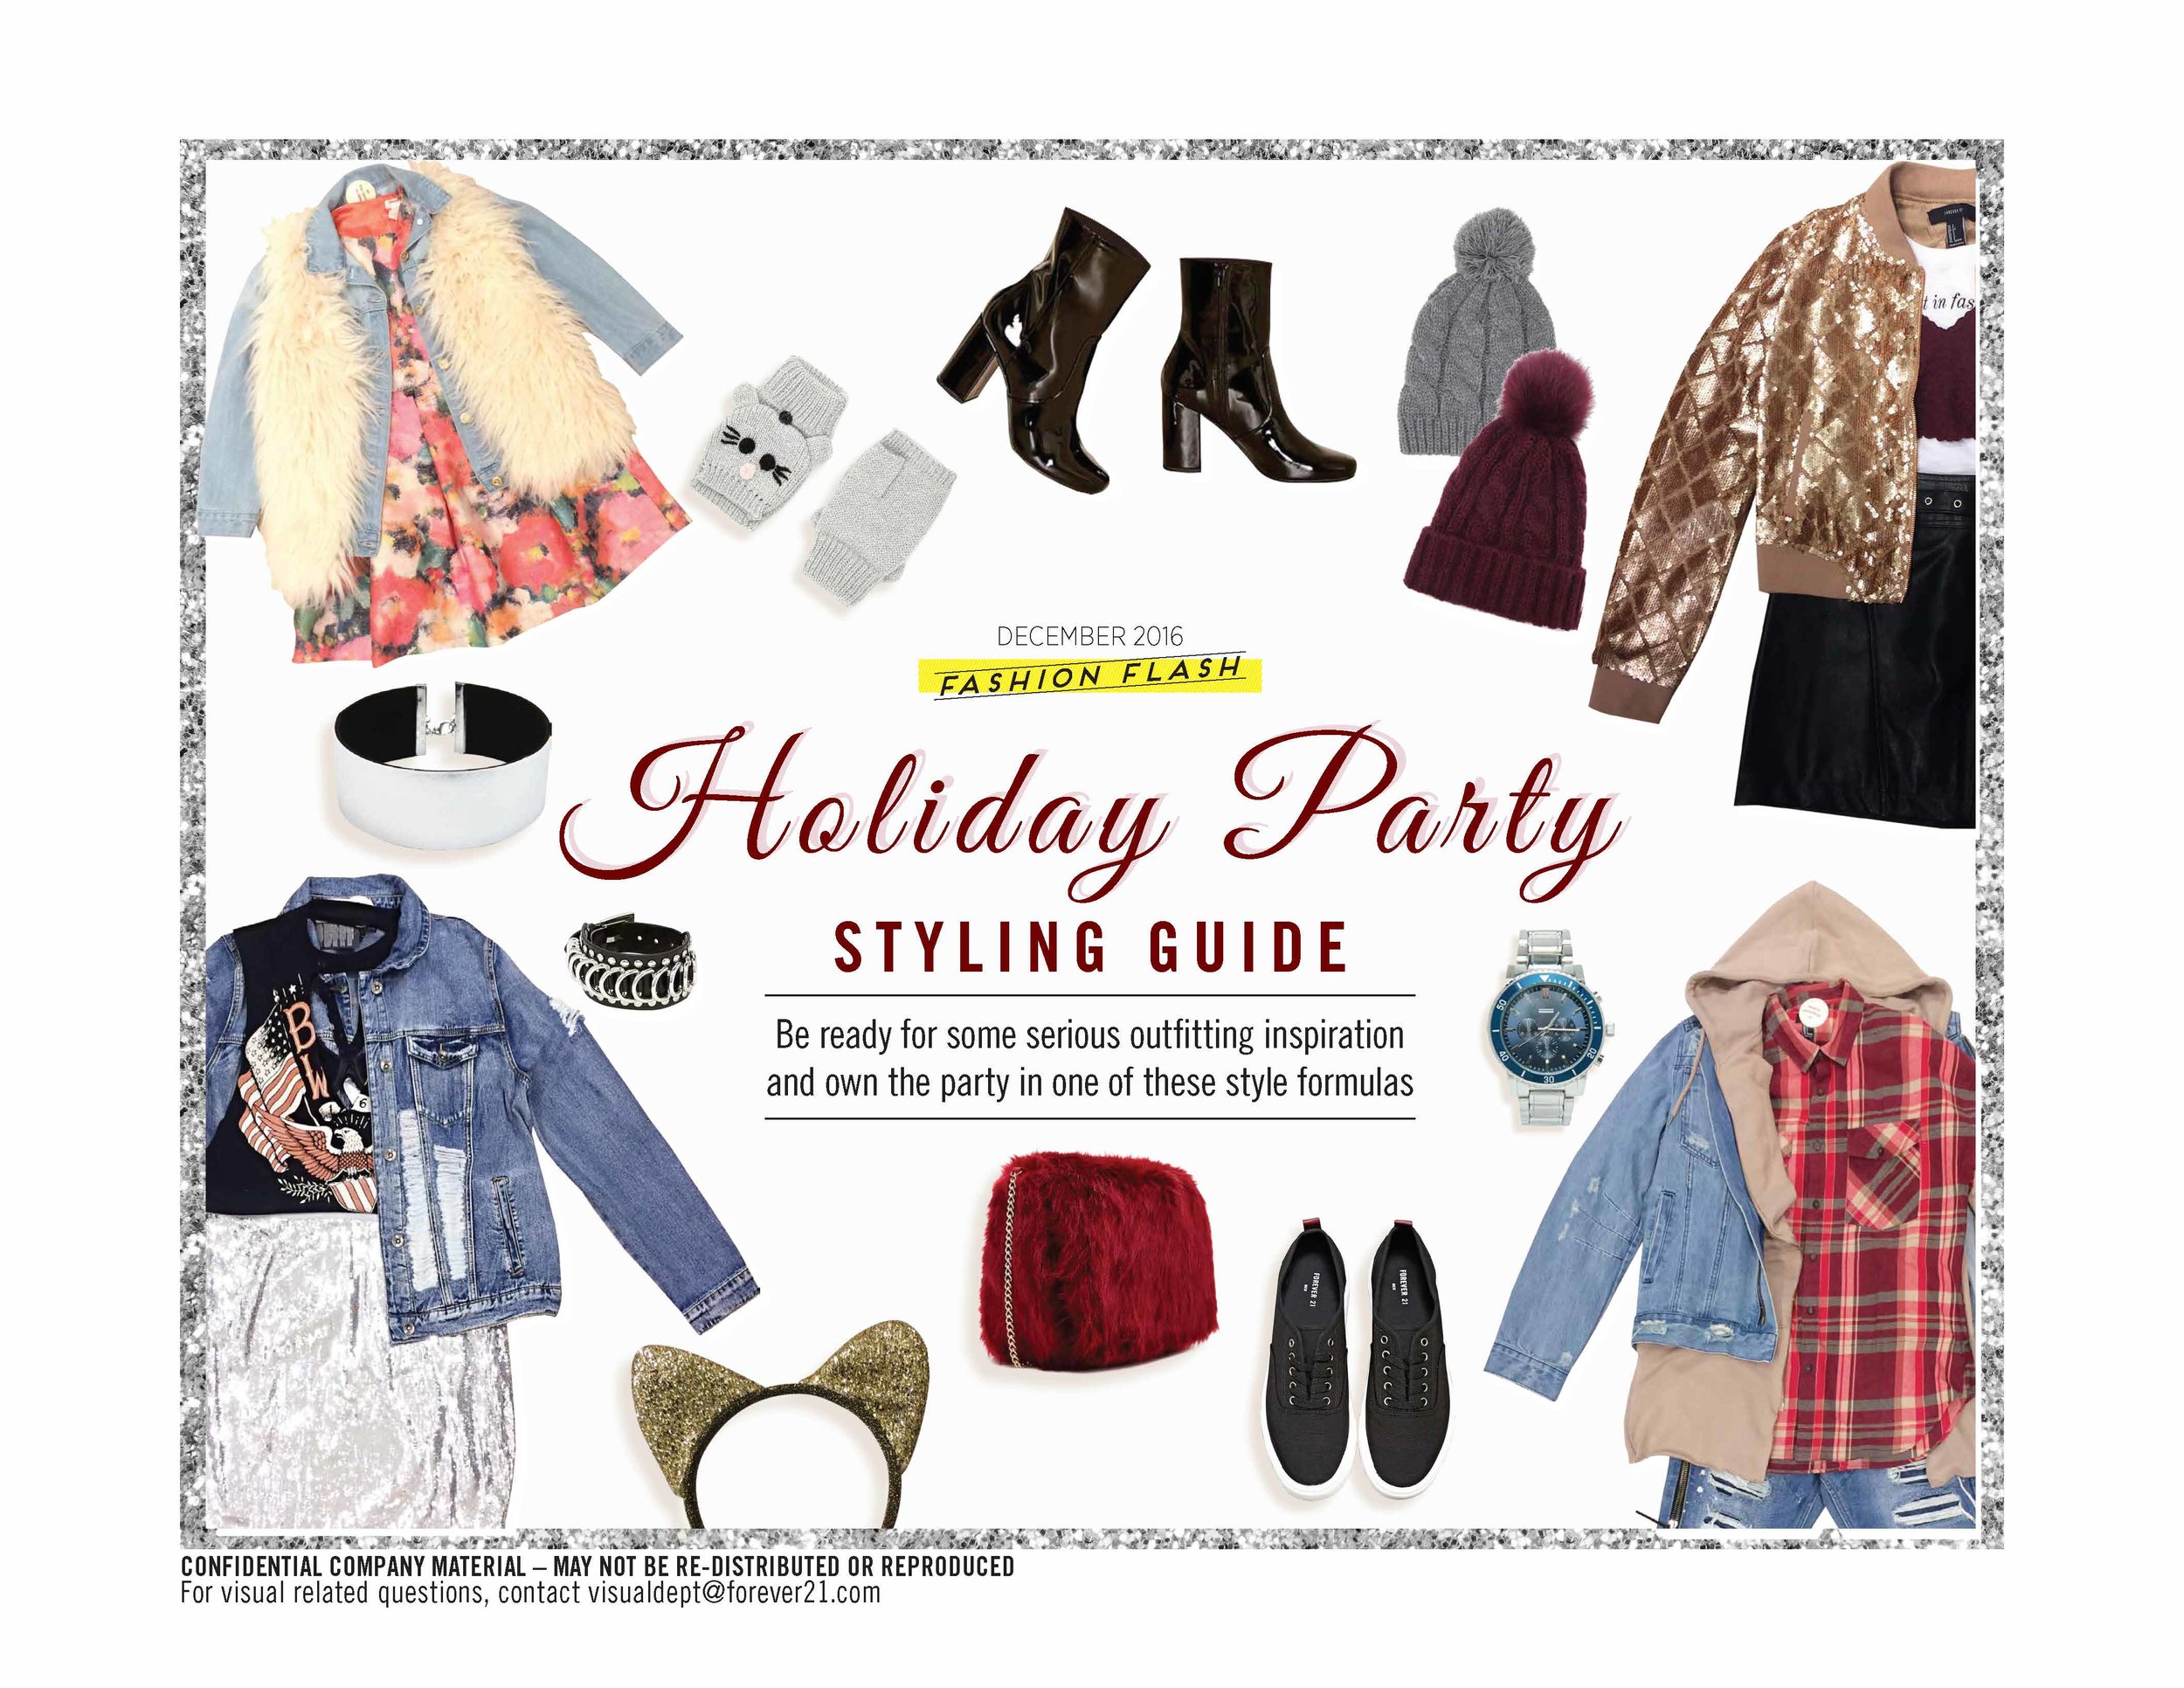 HOLIDAY PARTY STYLING GUIDE FASHION FLASH